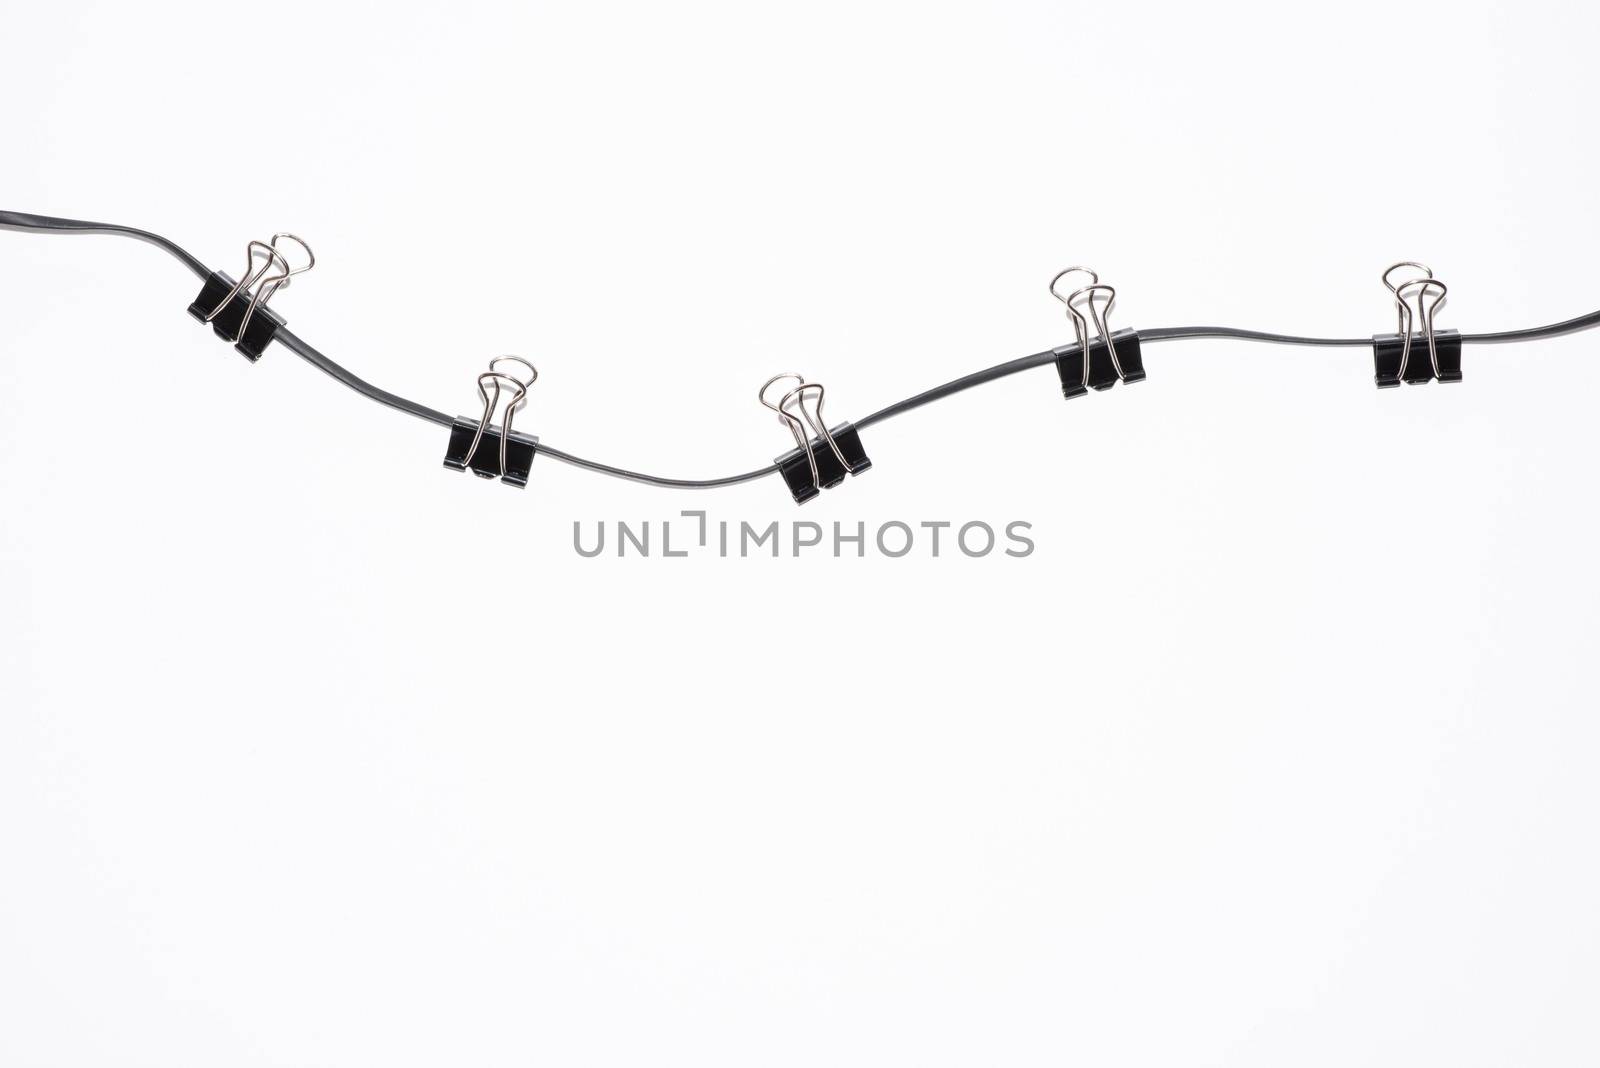 office paper clips on rope isolated on white by elina_chernikova